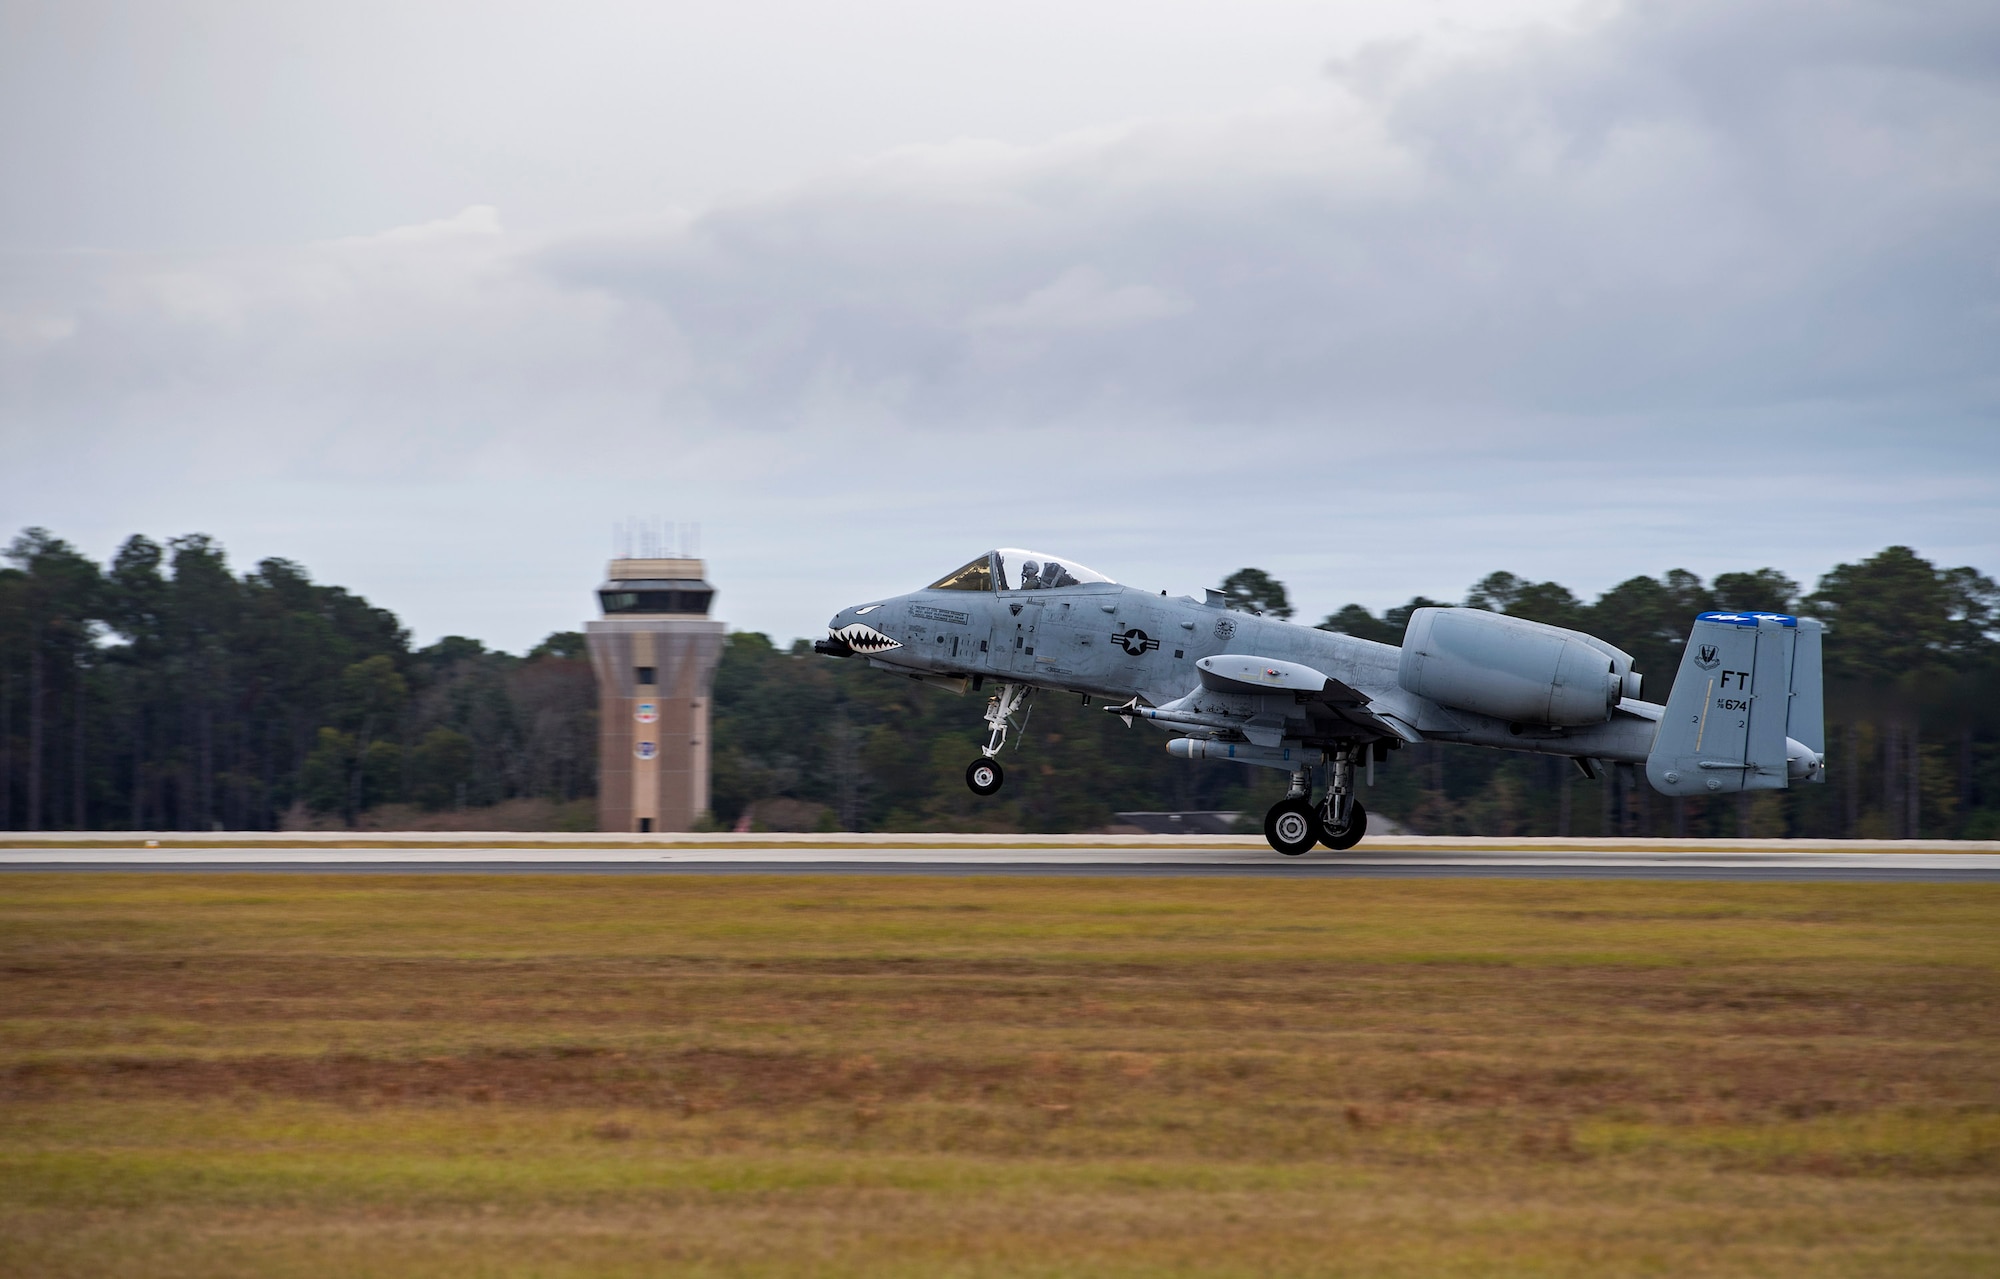 An A-10C Thunderbolt II takes off during a surge exercise, Nov. 9, 2016, at Moody Air Force Base, Ga. All of Moody's A-10's, several F-16CM Fighting Falcons from Shaw AFB's 55th Fighter Squadron and McEntire Joint National Guard's 157th Fighter Squadron, practiced interacting in a limited air space for downrange combat operations. (U.S. Air Force photo by Airman 1st Class Janiqua P. Robinson)